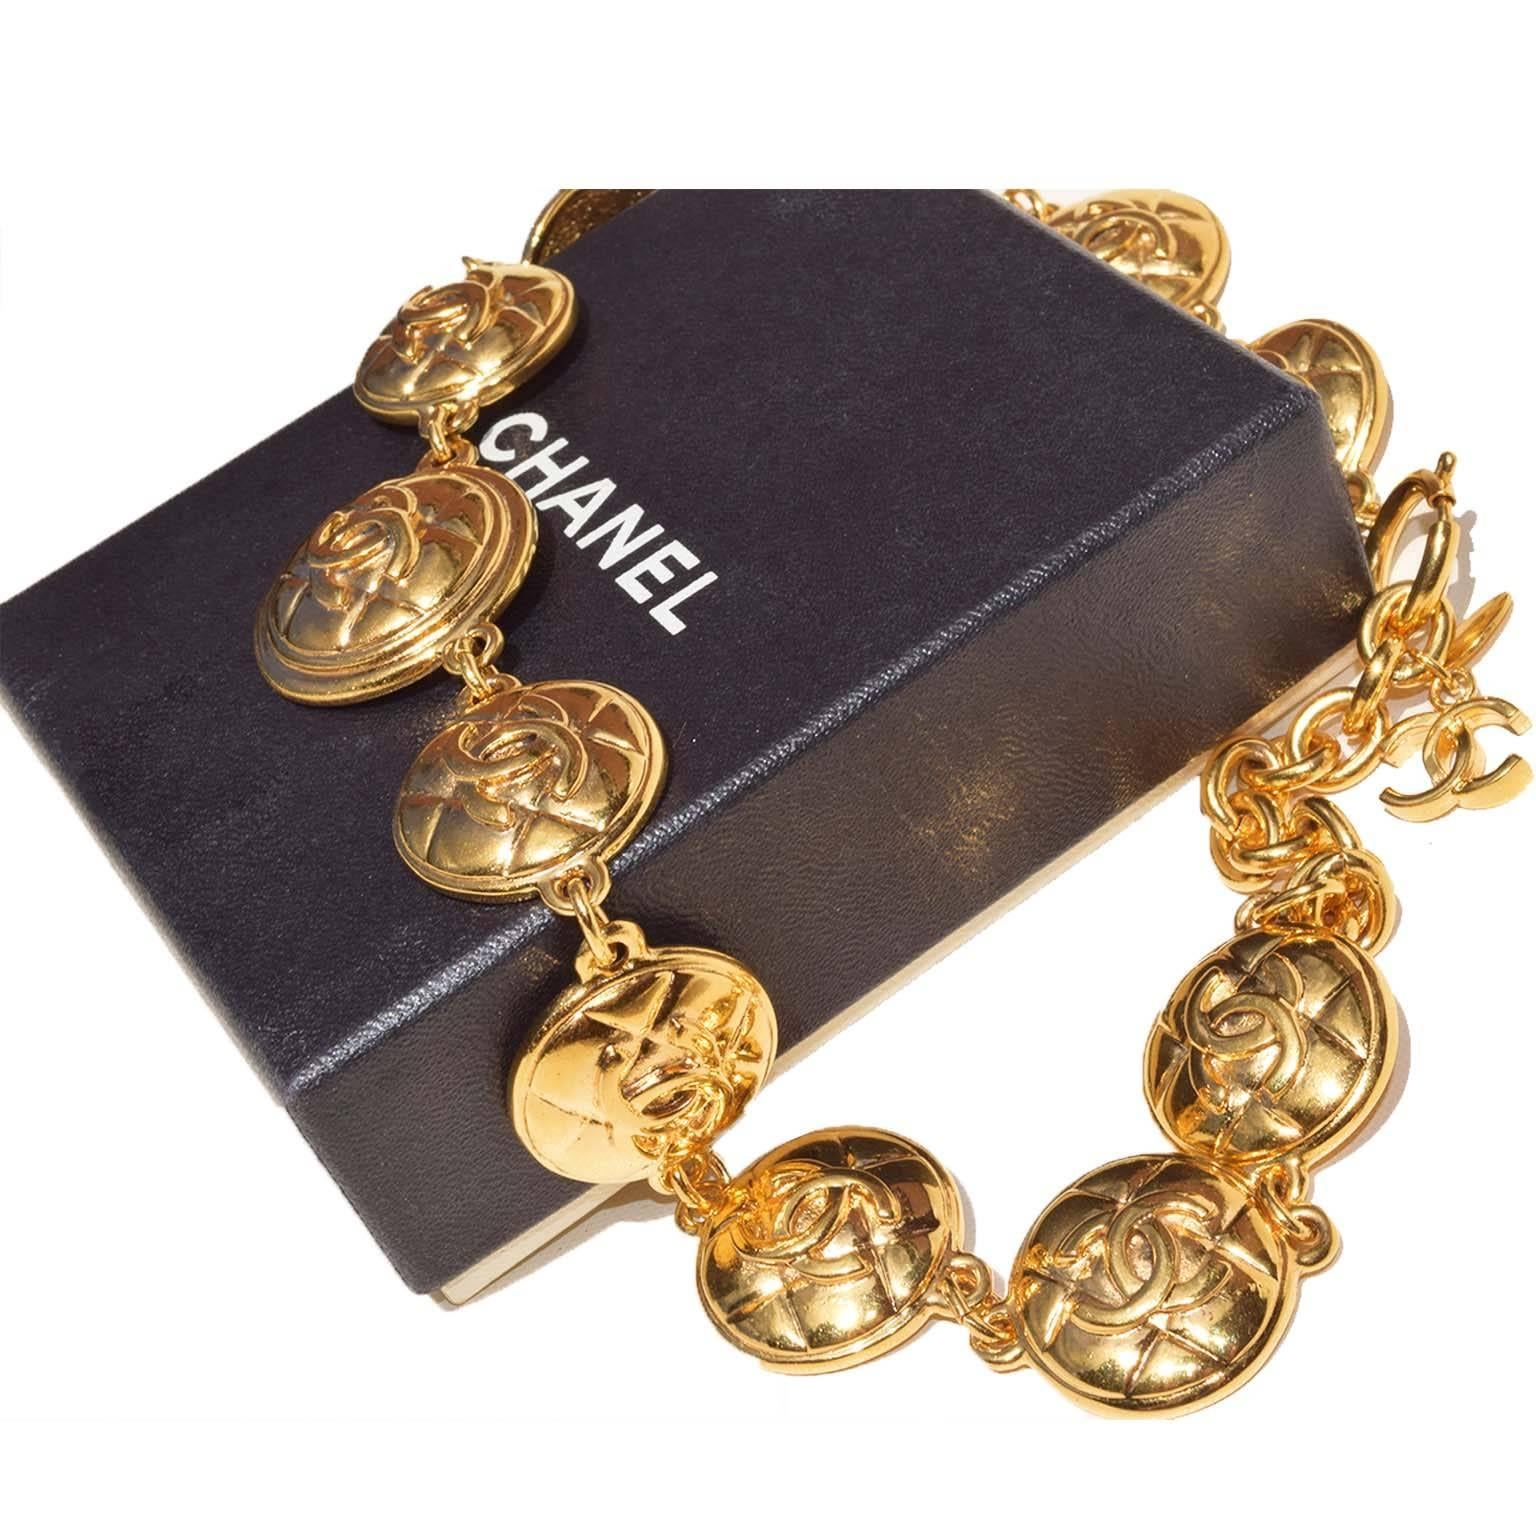 Chanel vintage quilted discs choker. 11 goldtone discs with quilted texture and CC logo. CC hangtag. Since the cartouche does not mention collection number or year, this choker was manufactured between 1984 - 1992. Comes in its original